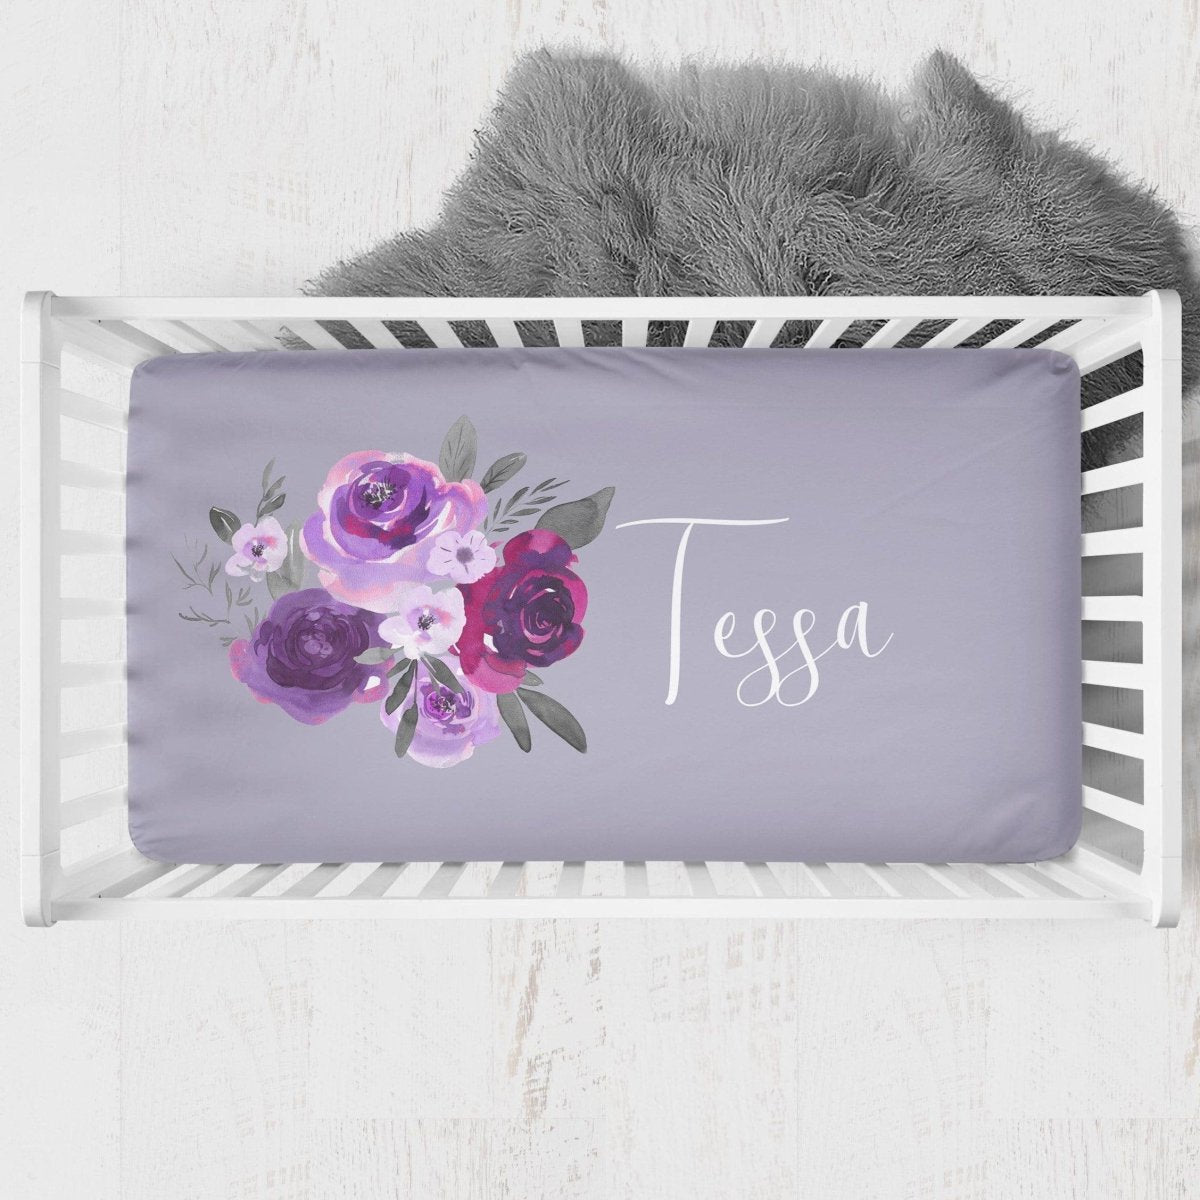 Personalized Purple Floral Crib Sheet - gender_girl, Personalized_Yes, text